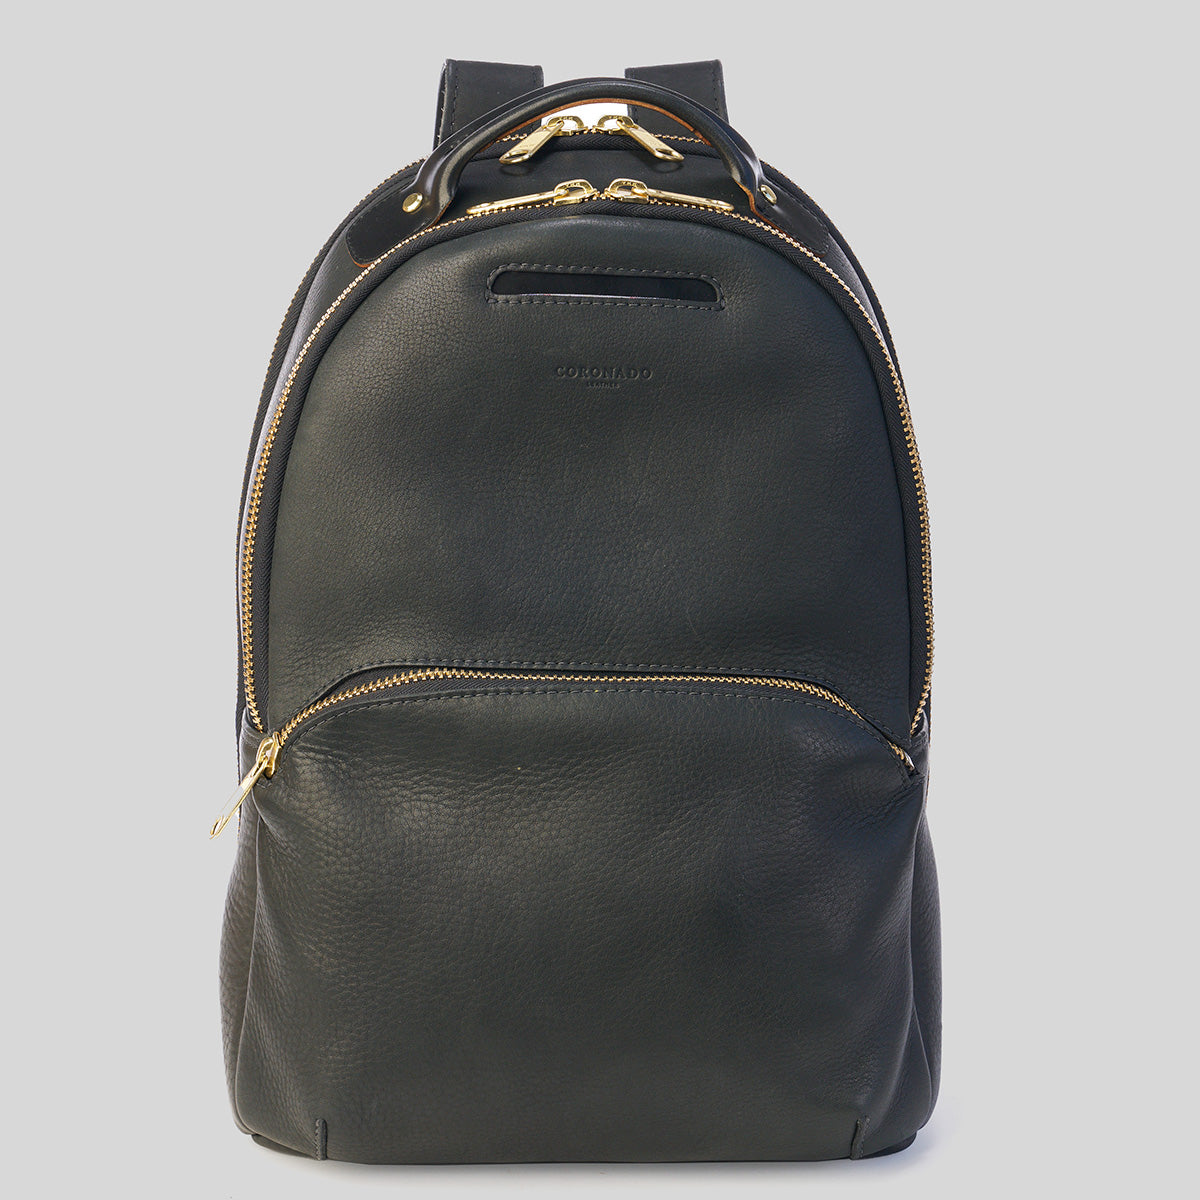 Clark Backpack | Travel Bag | Genuine Leather – Ibty Collections